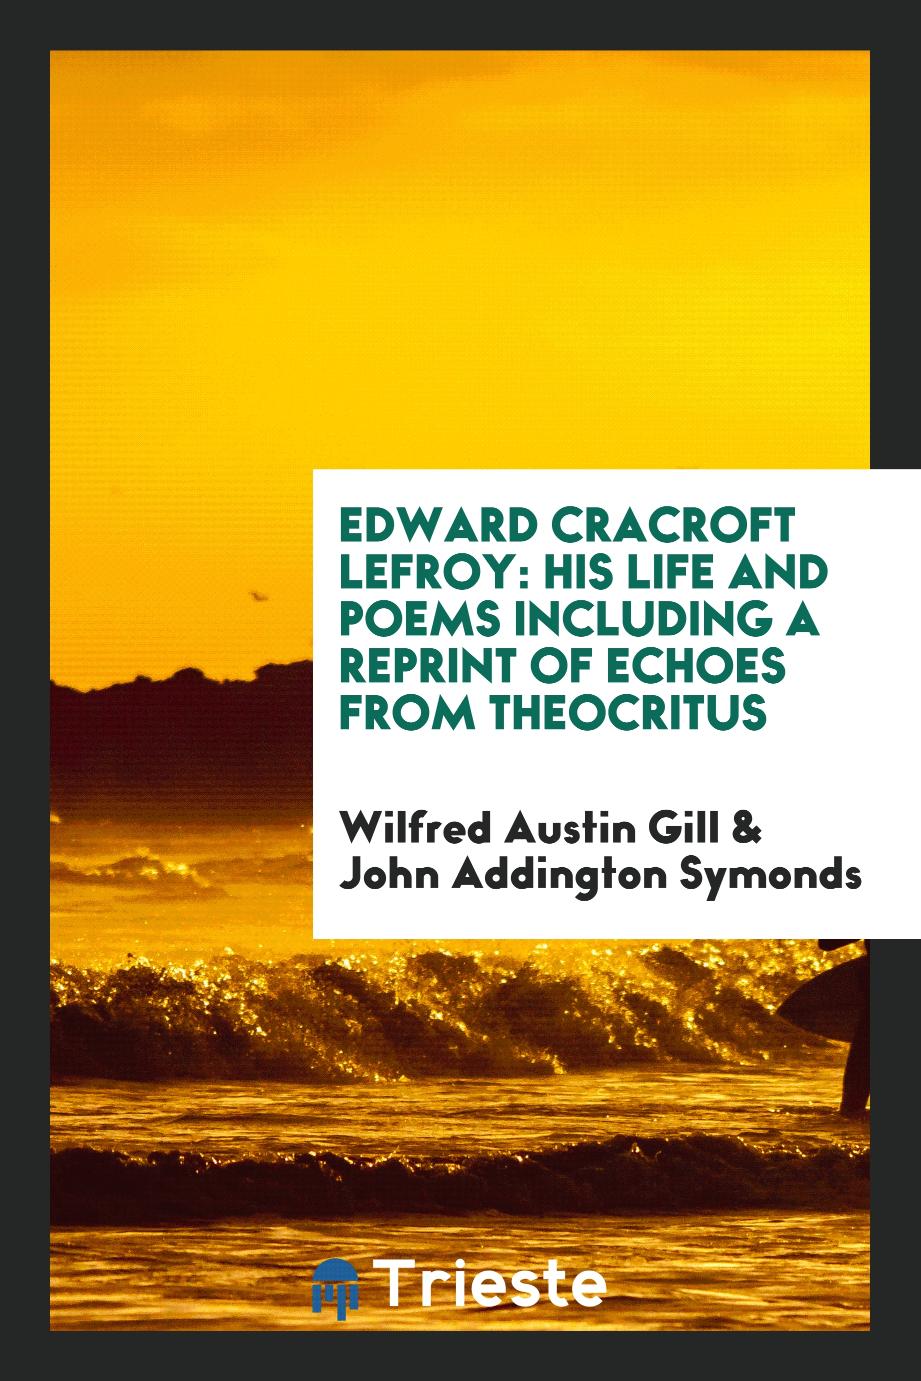 Wilfred Austin Gill, John Addington Symonds - Edward Cracroft Lefroy: His Life and Poems Including a Reprint of Echoes from Theocritus